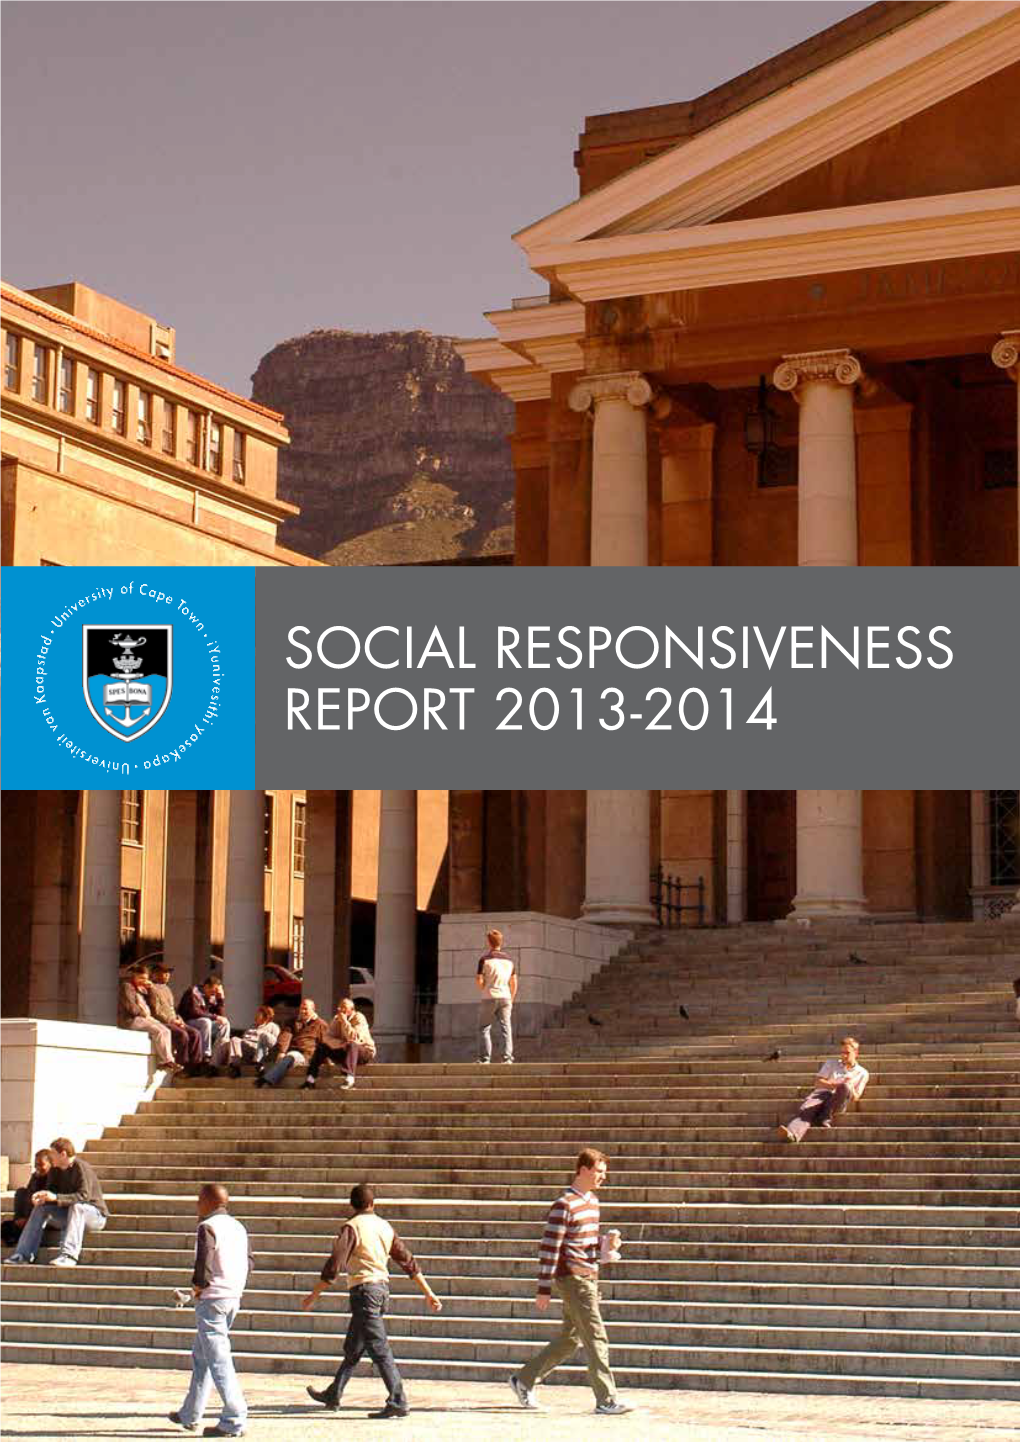 SOCIAL RESPONSIVENESS REPORT 2013-2014 Our Mission UCT Aspires to Become a Premier Academic Meeting Point Between South Africa, the Rest of Africa and the World